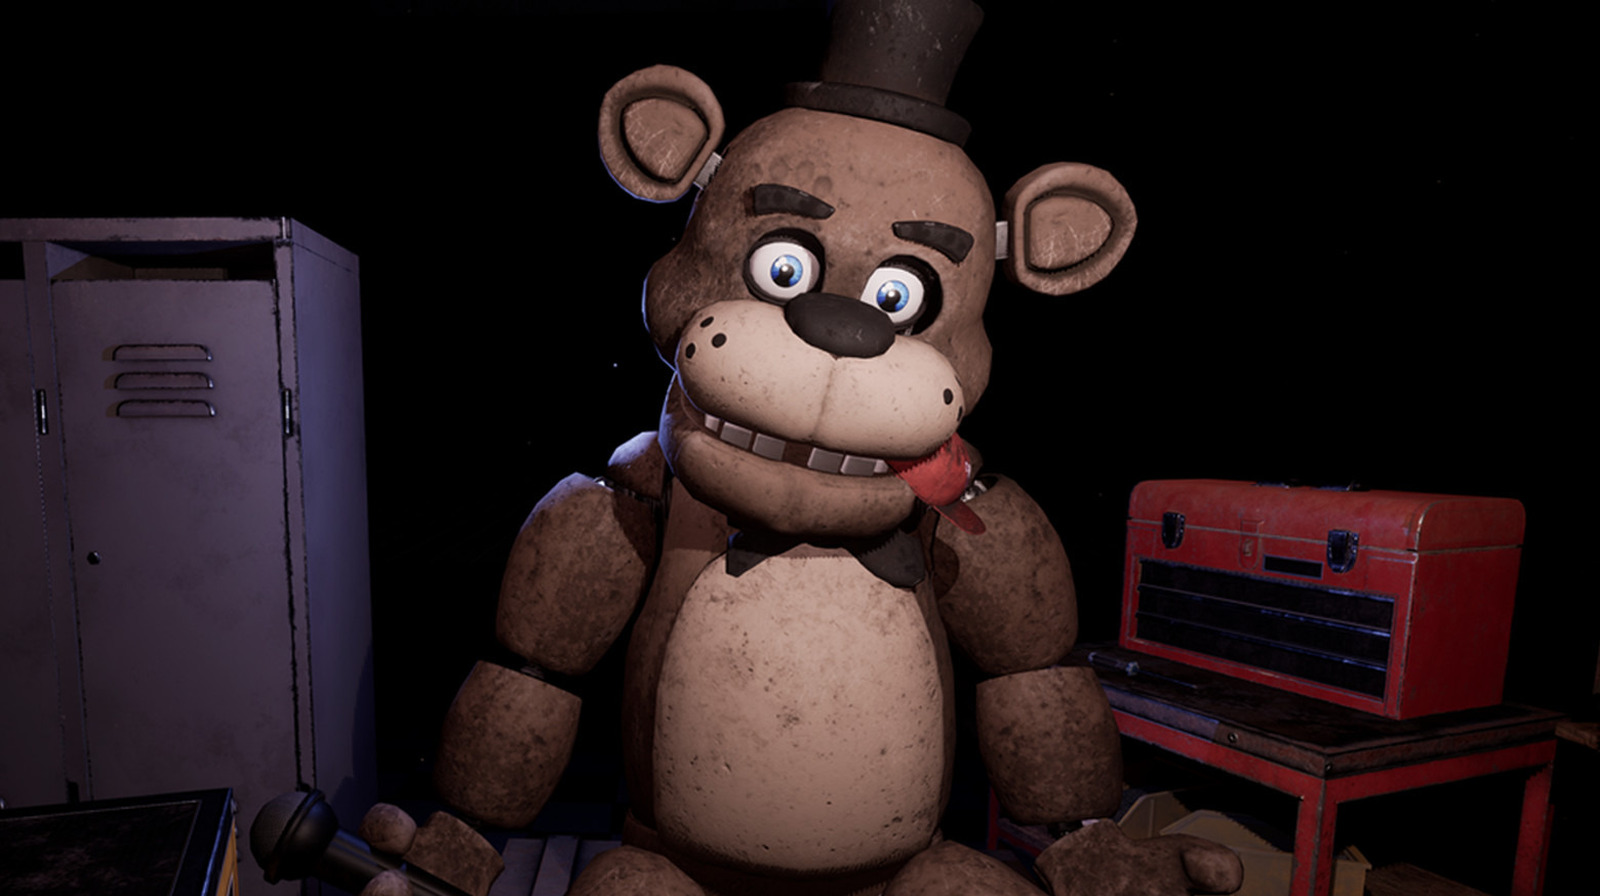 What Is Five Nights At Freddy's: Everything Parents Need To Know Before The  Movie